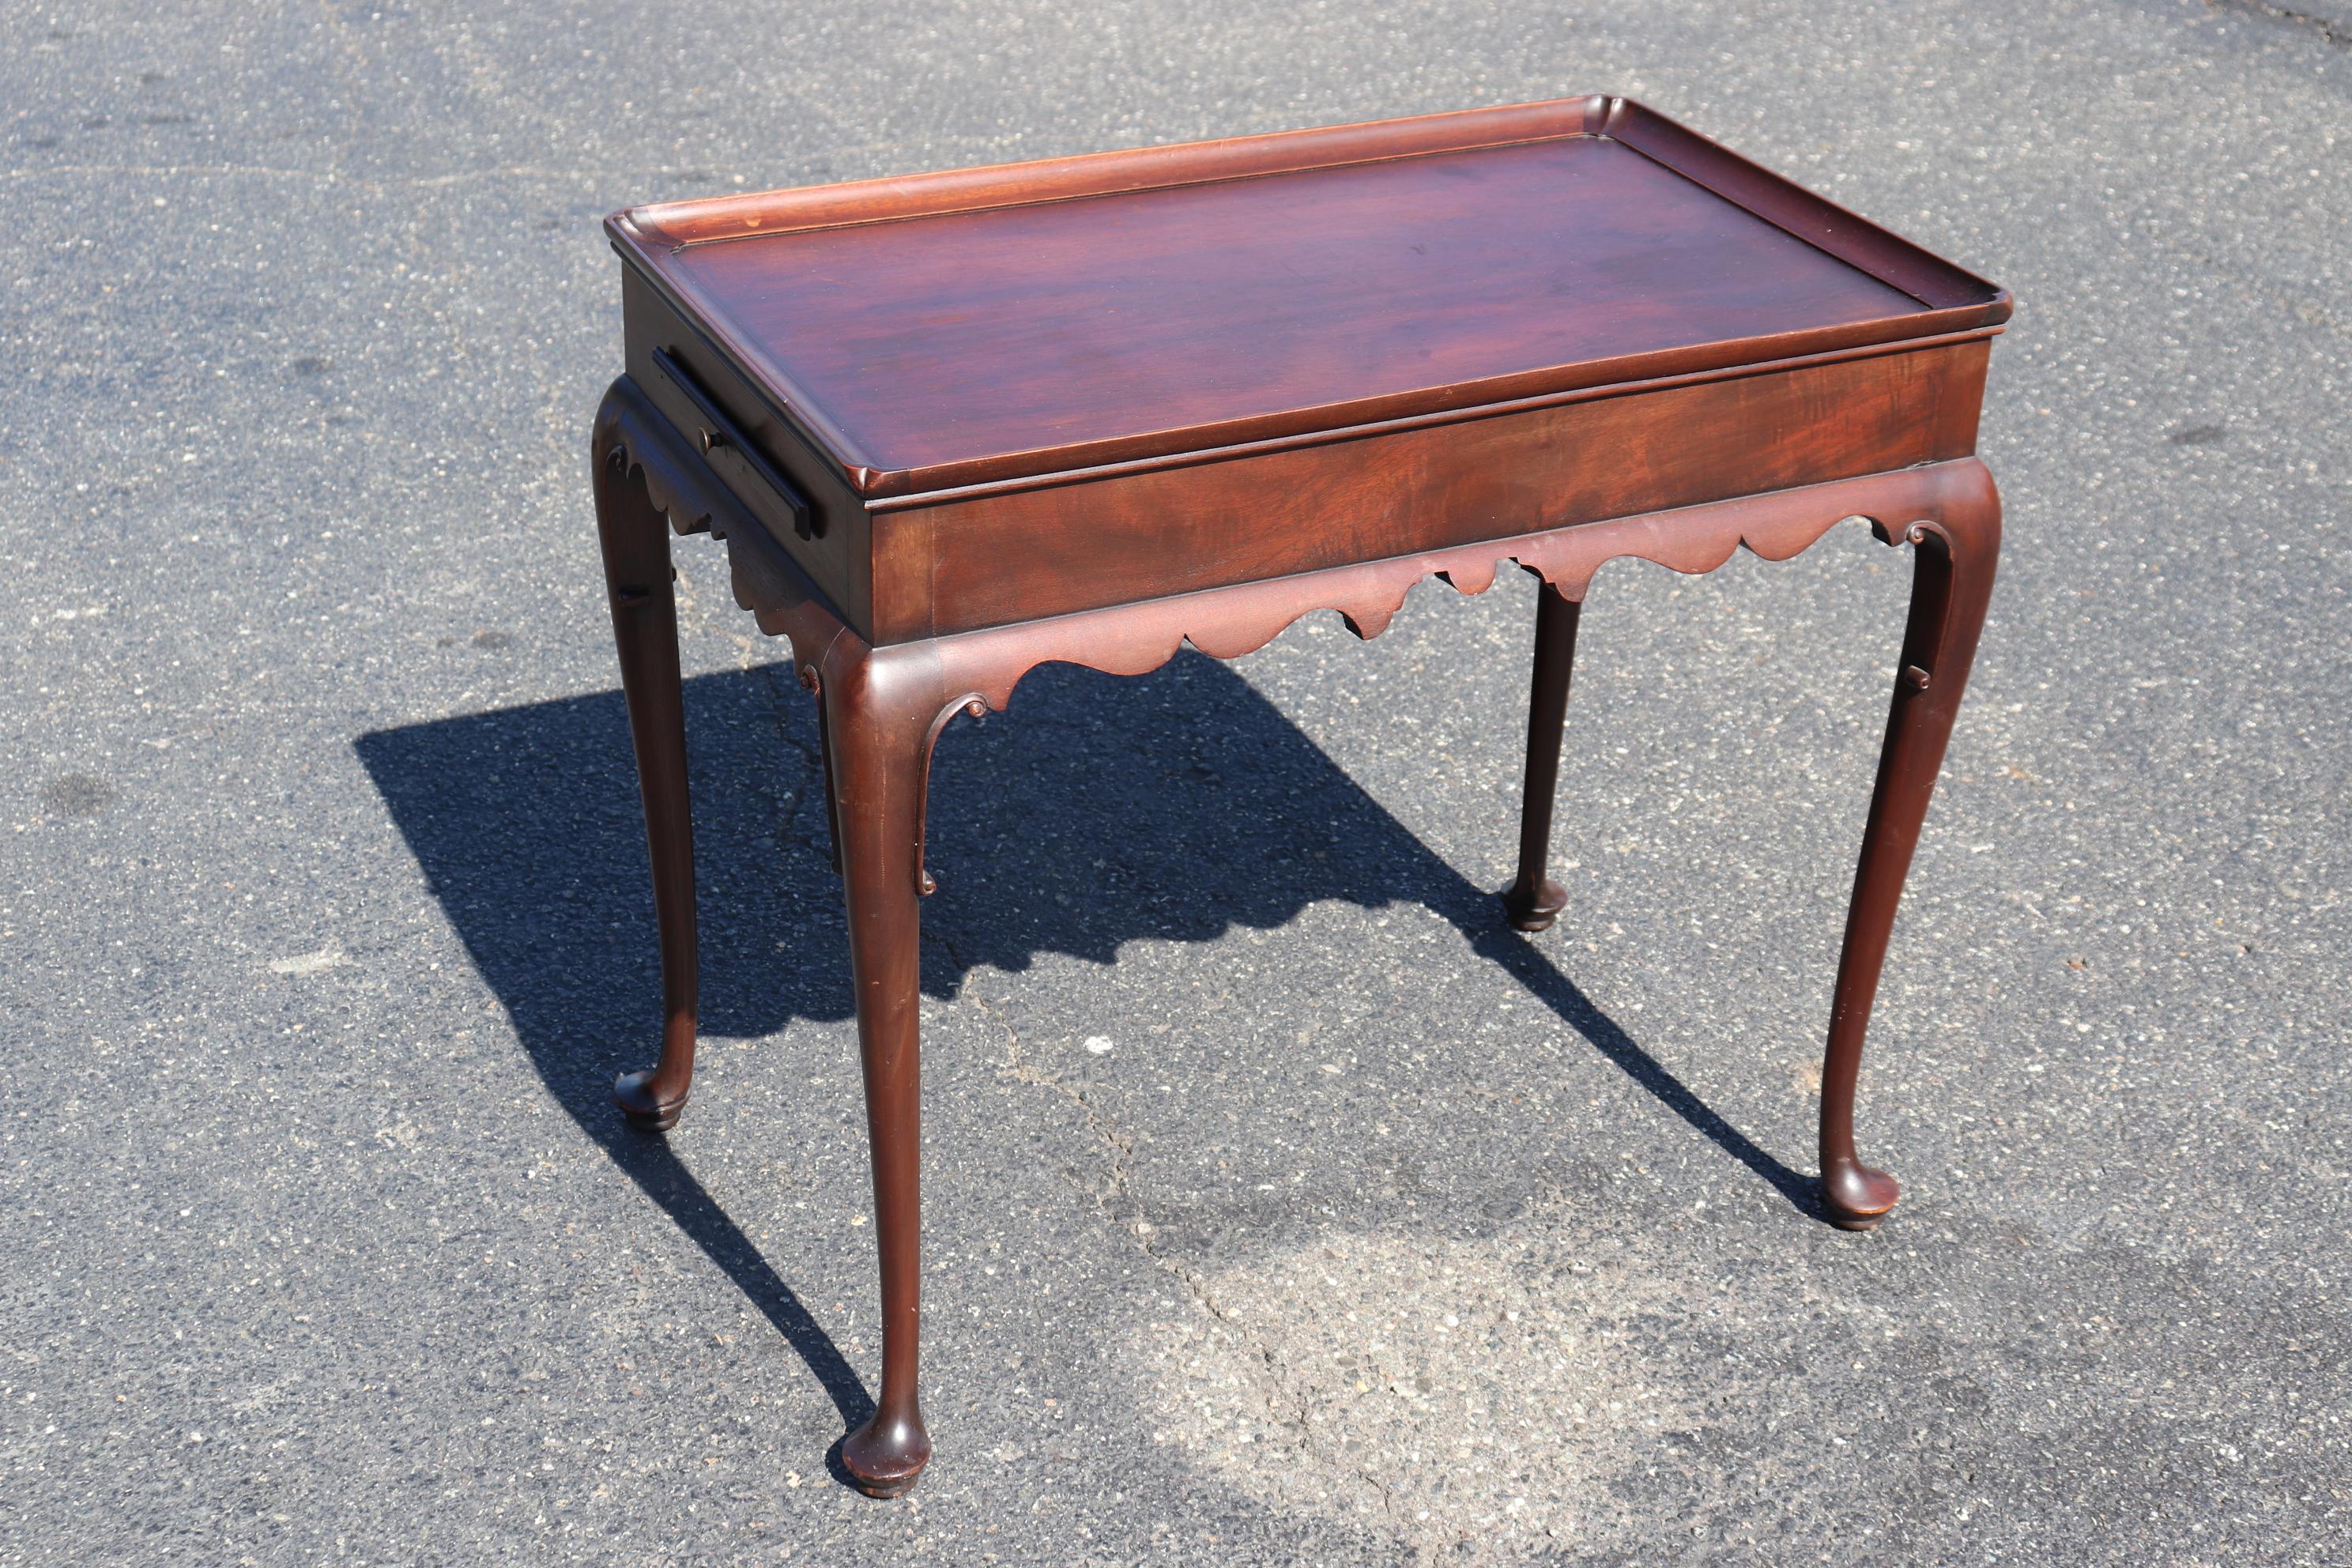 This is a fine quality solid mahogany Kittinger tea table in the Colonial Williamsburg line. The table dates to the 1950s and is entirely original. The table is in good vintage condition and will show signs of age and use on the finish. Measures 29